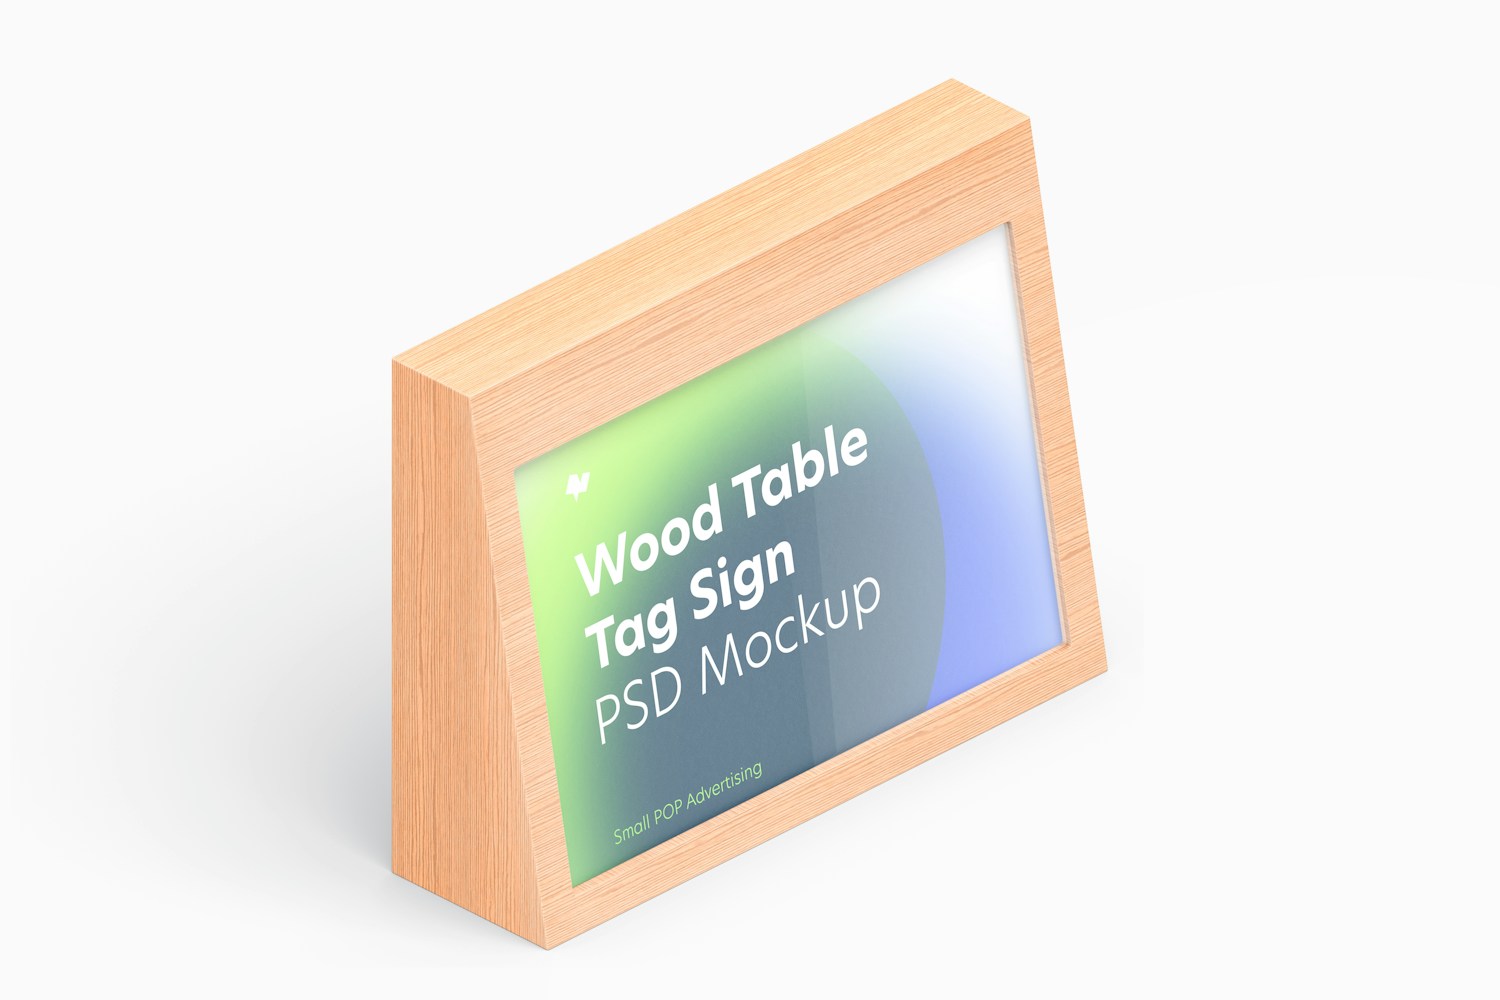 Wood Table Advertising Tag Sign Mockup, Isometric Right View